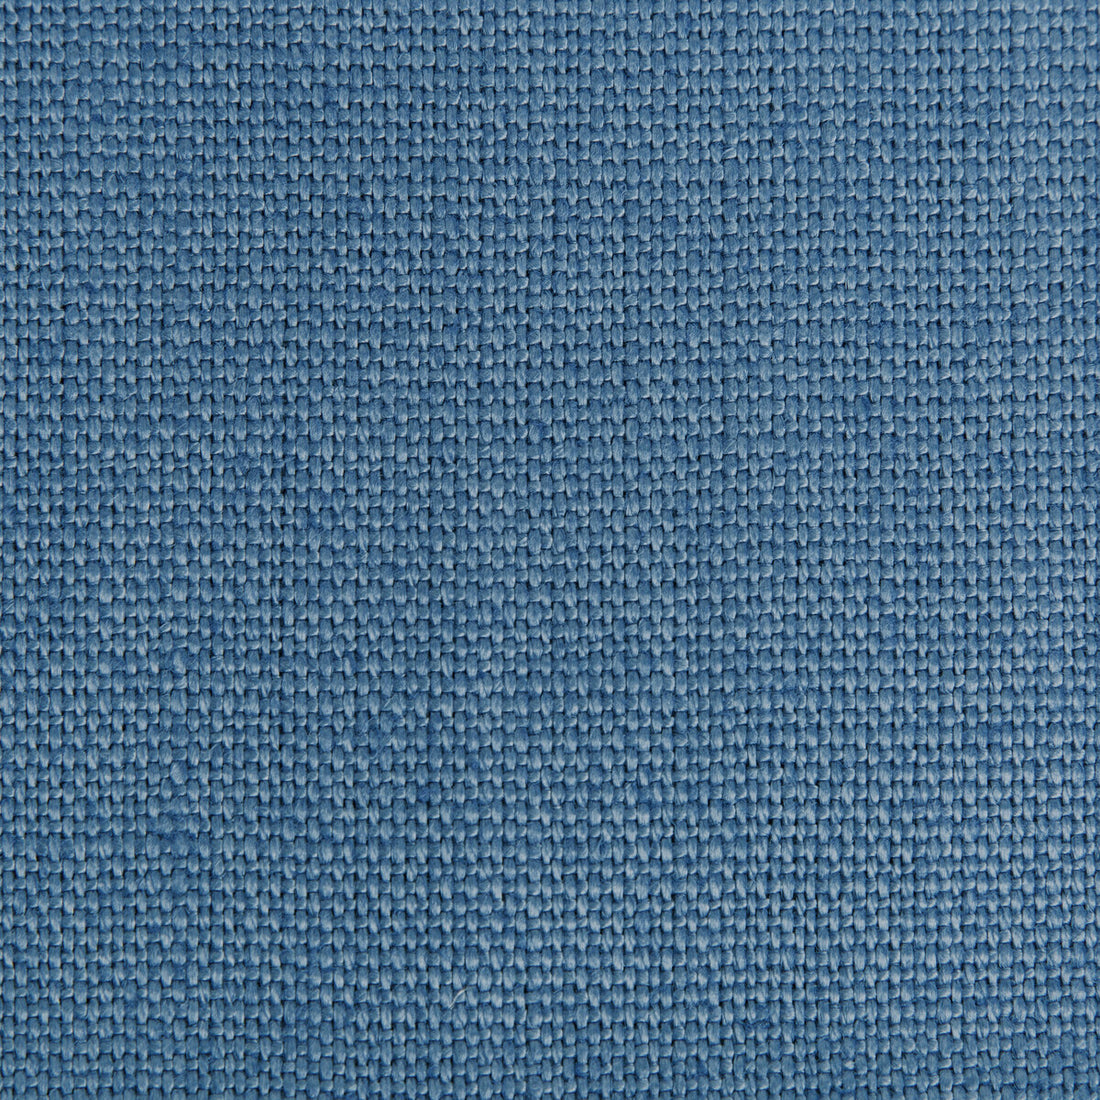 Hampton Linen fabric in ceramic blue color - pattern 2012171.510.0 - by Lee Jofa in the The Complete Linen IV collection